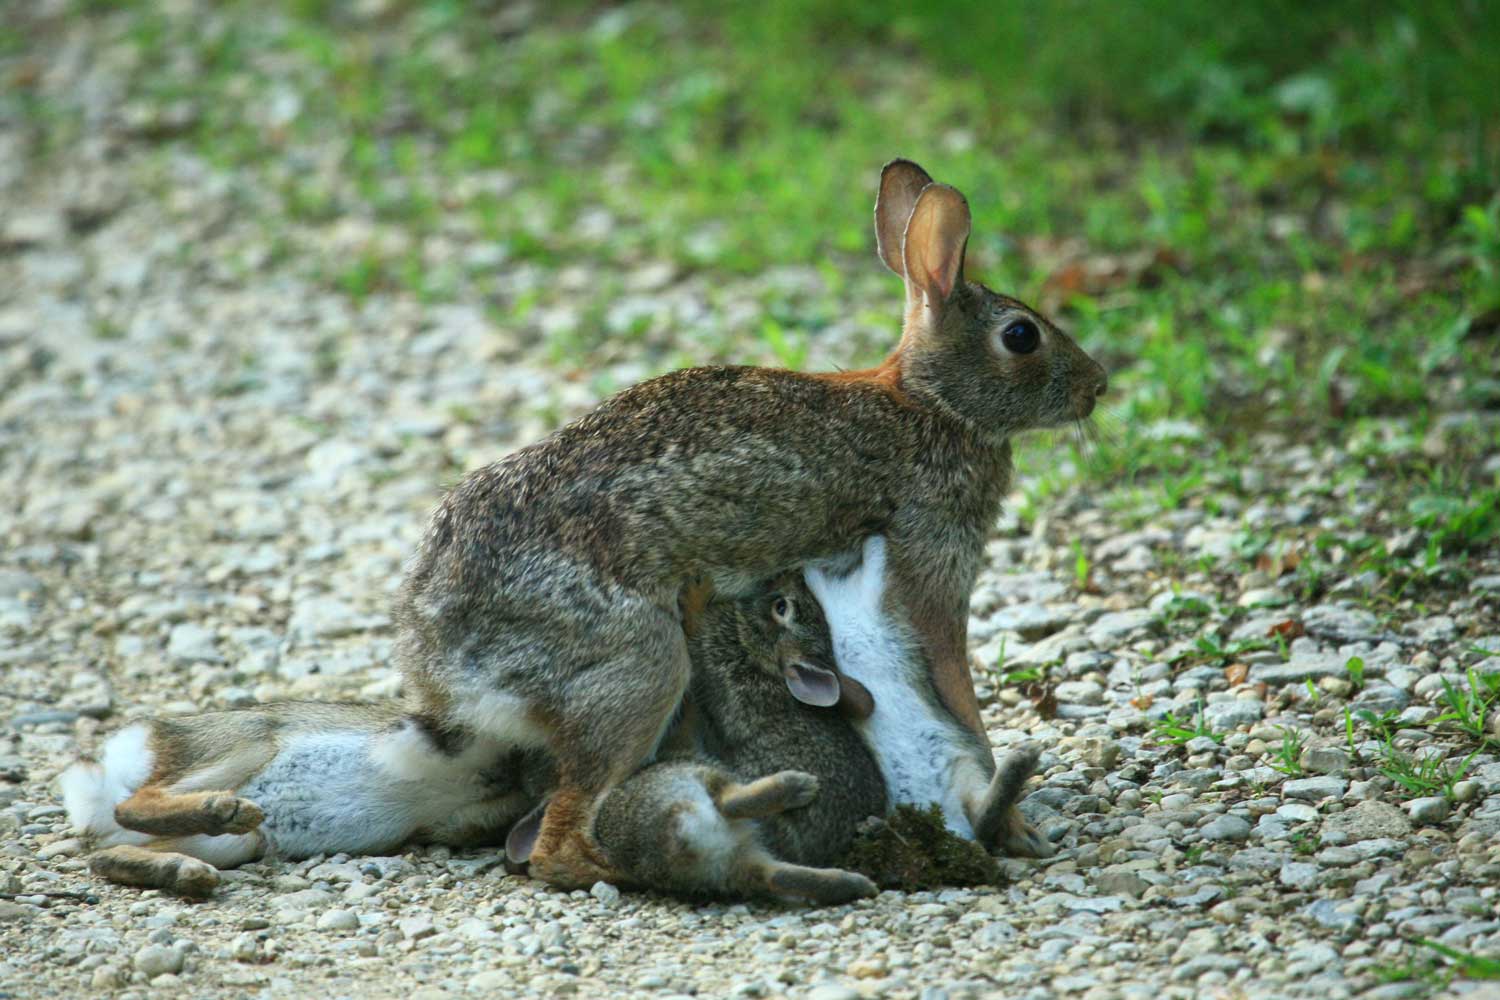 A cottontail rabbit on a gravel surface with several babies nursing.